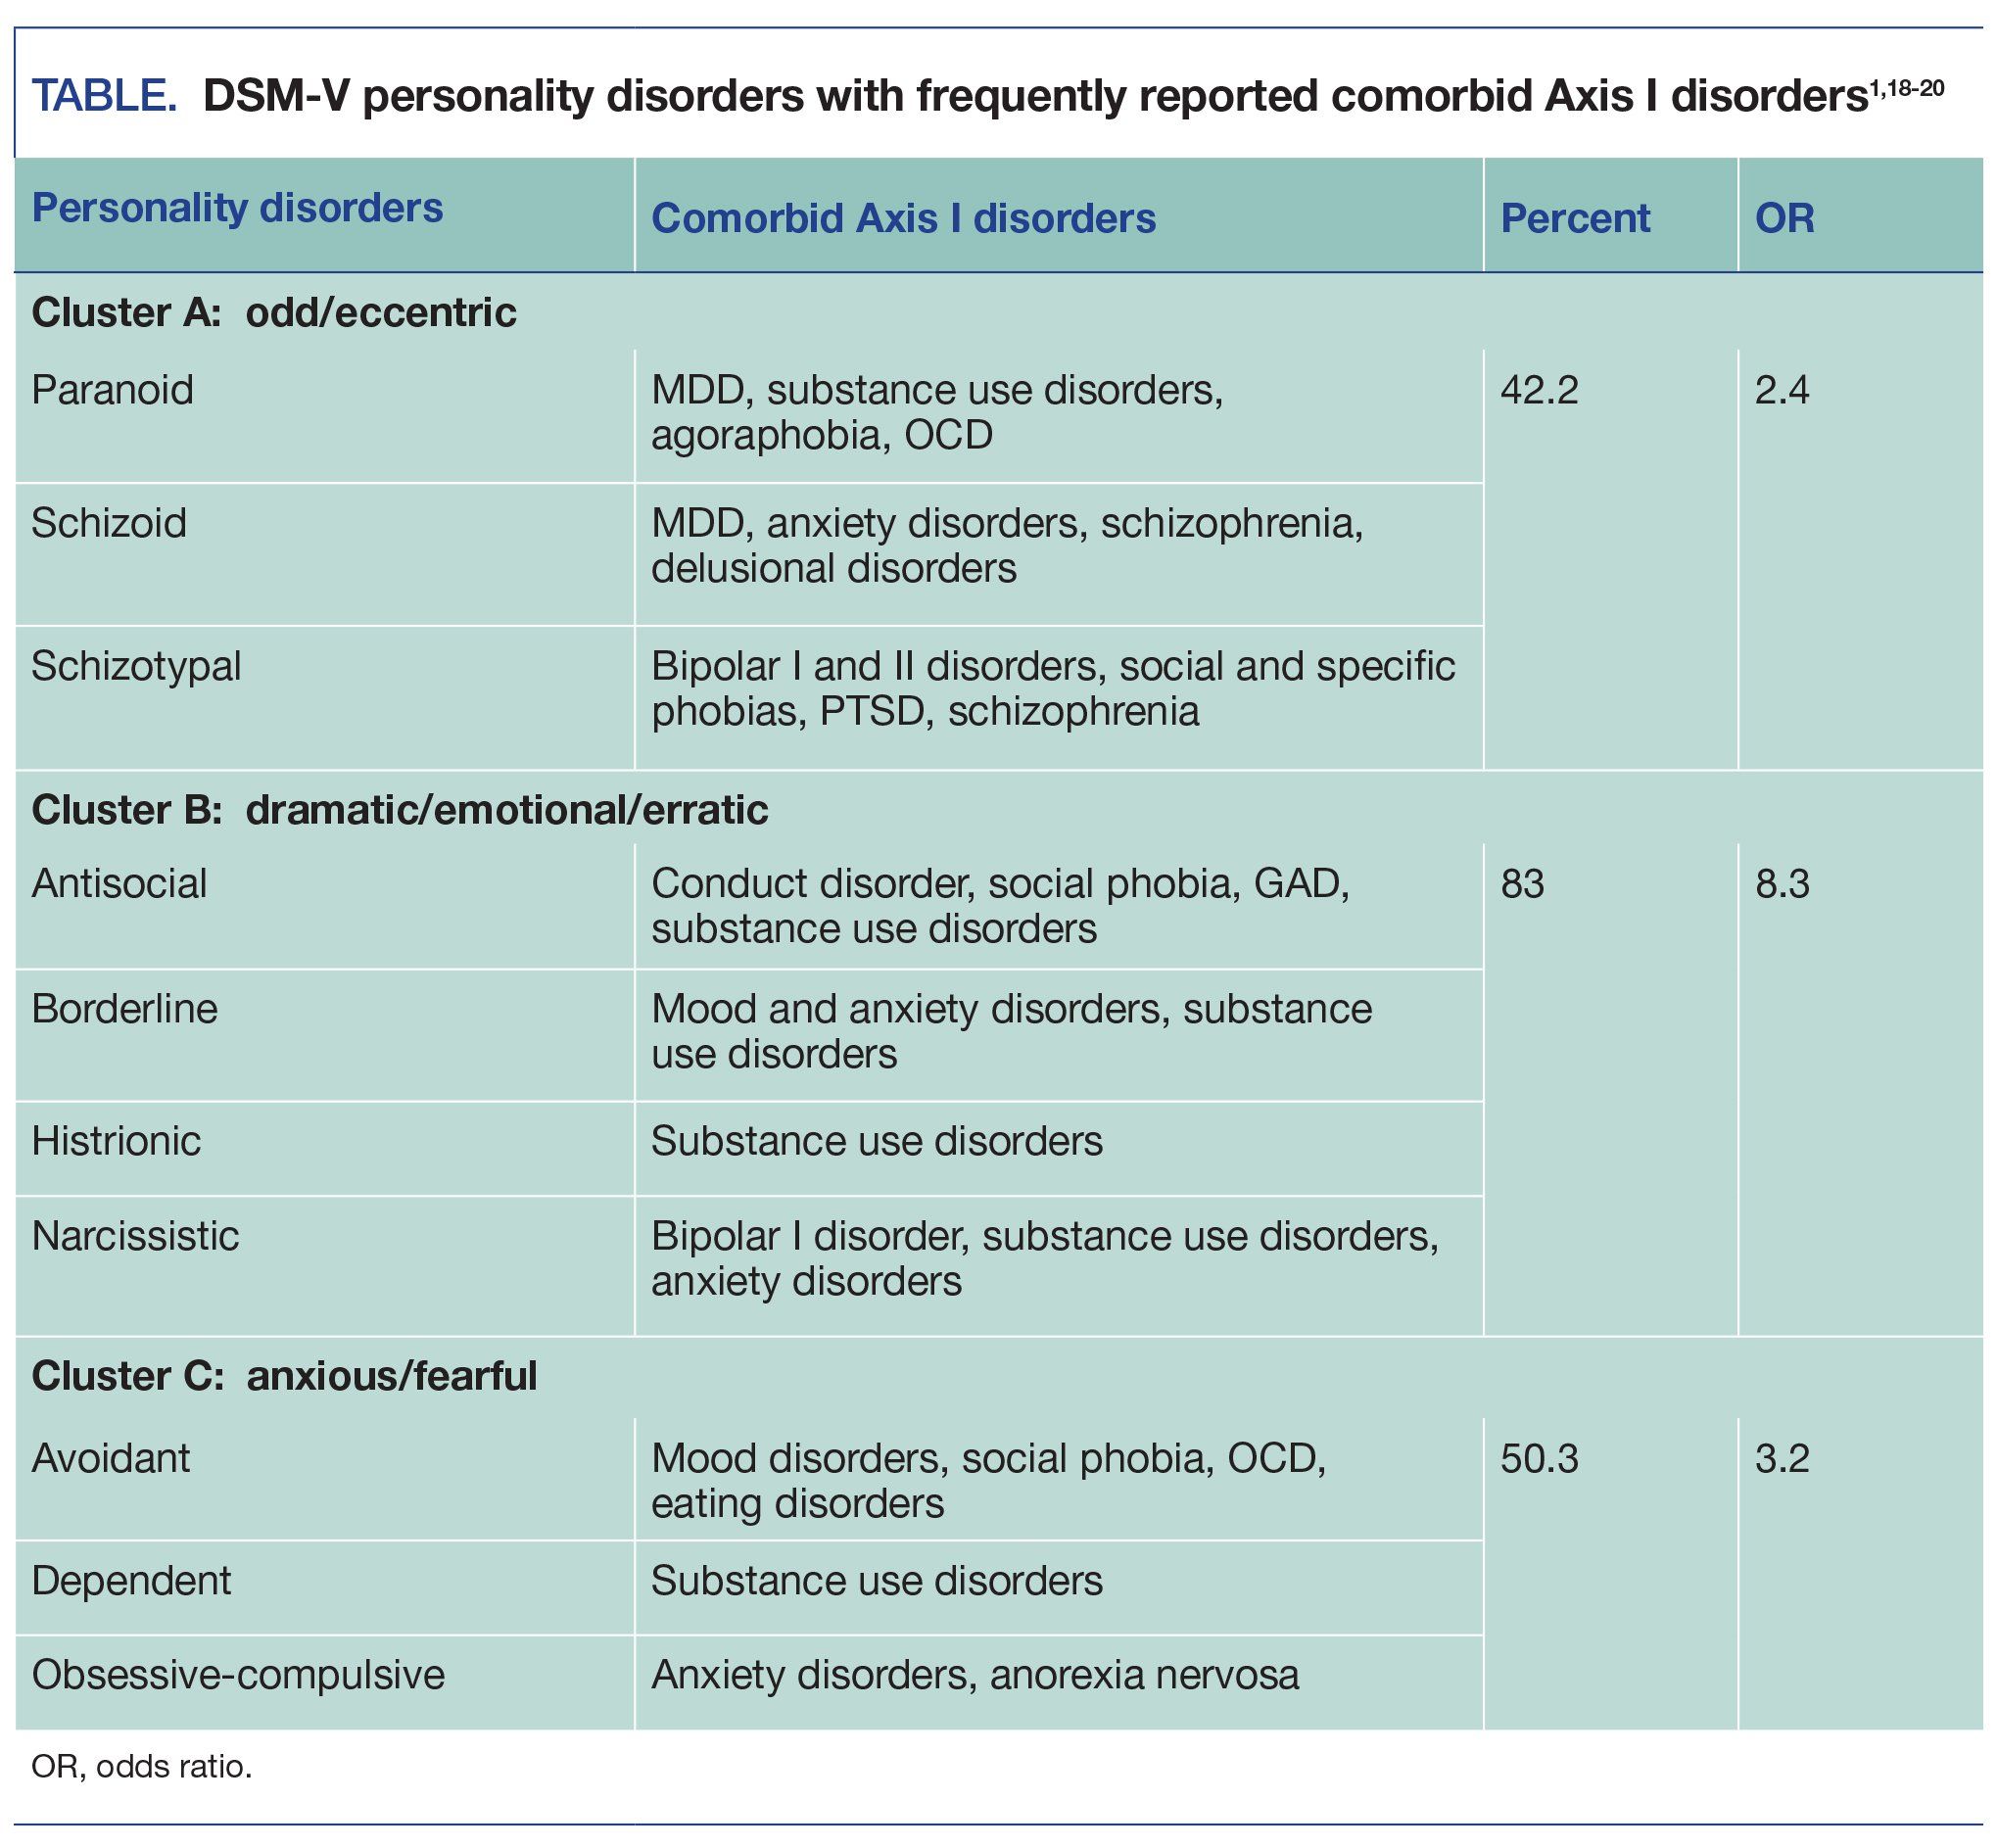 TABLE. DSM-V personality disorders frequently reported comorbid Axis I disorders